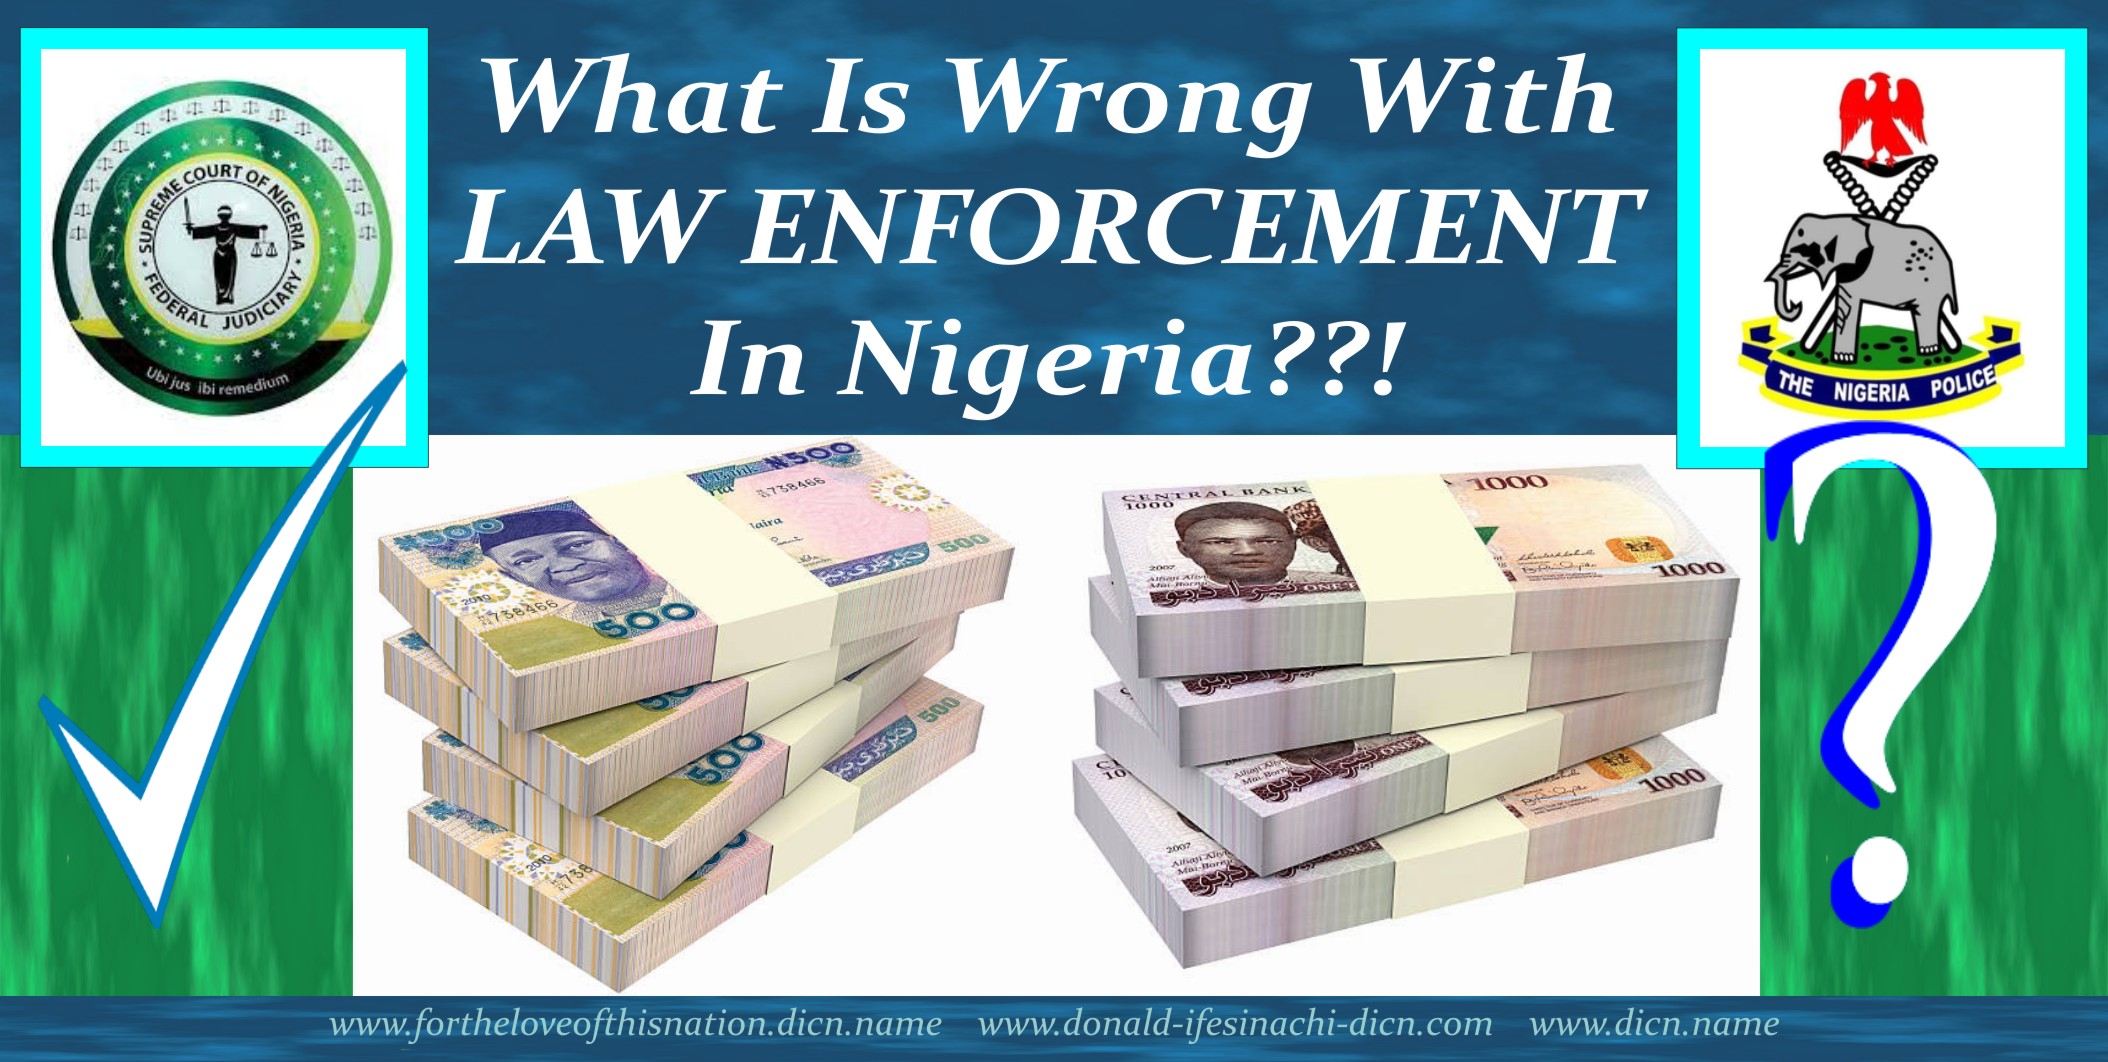 What Is Wrong With Law Enforcement In Nigeria??! – Donald IfesinaChi (Dicn)